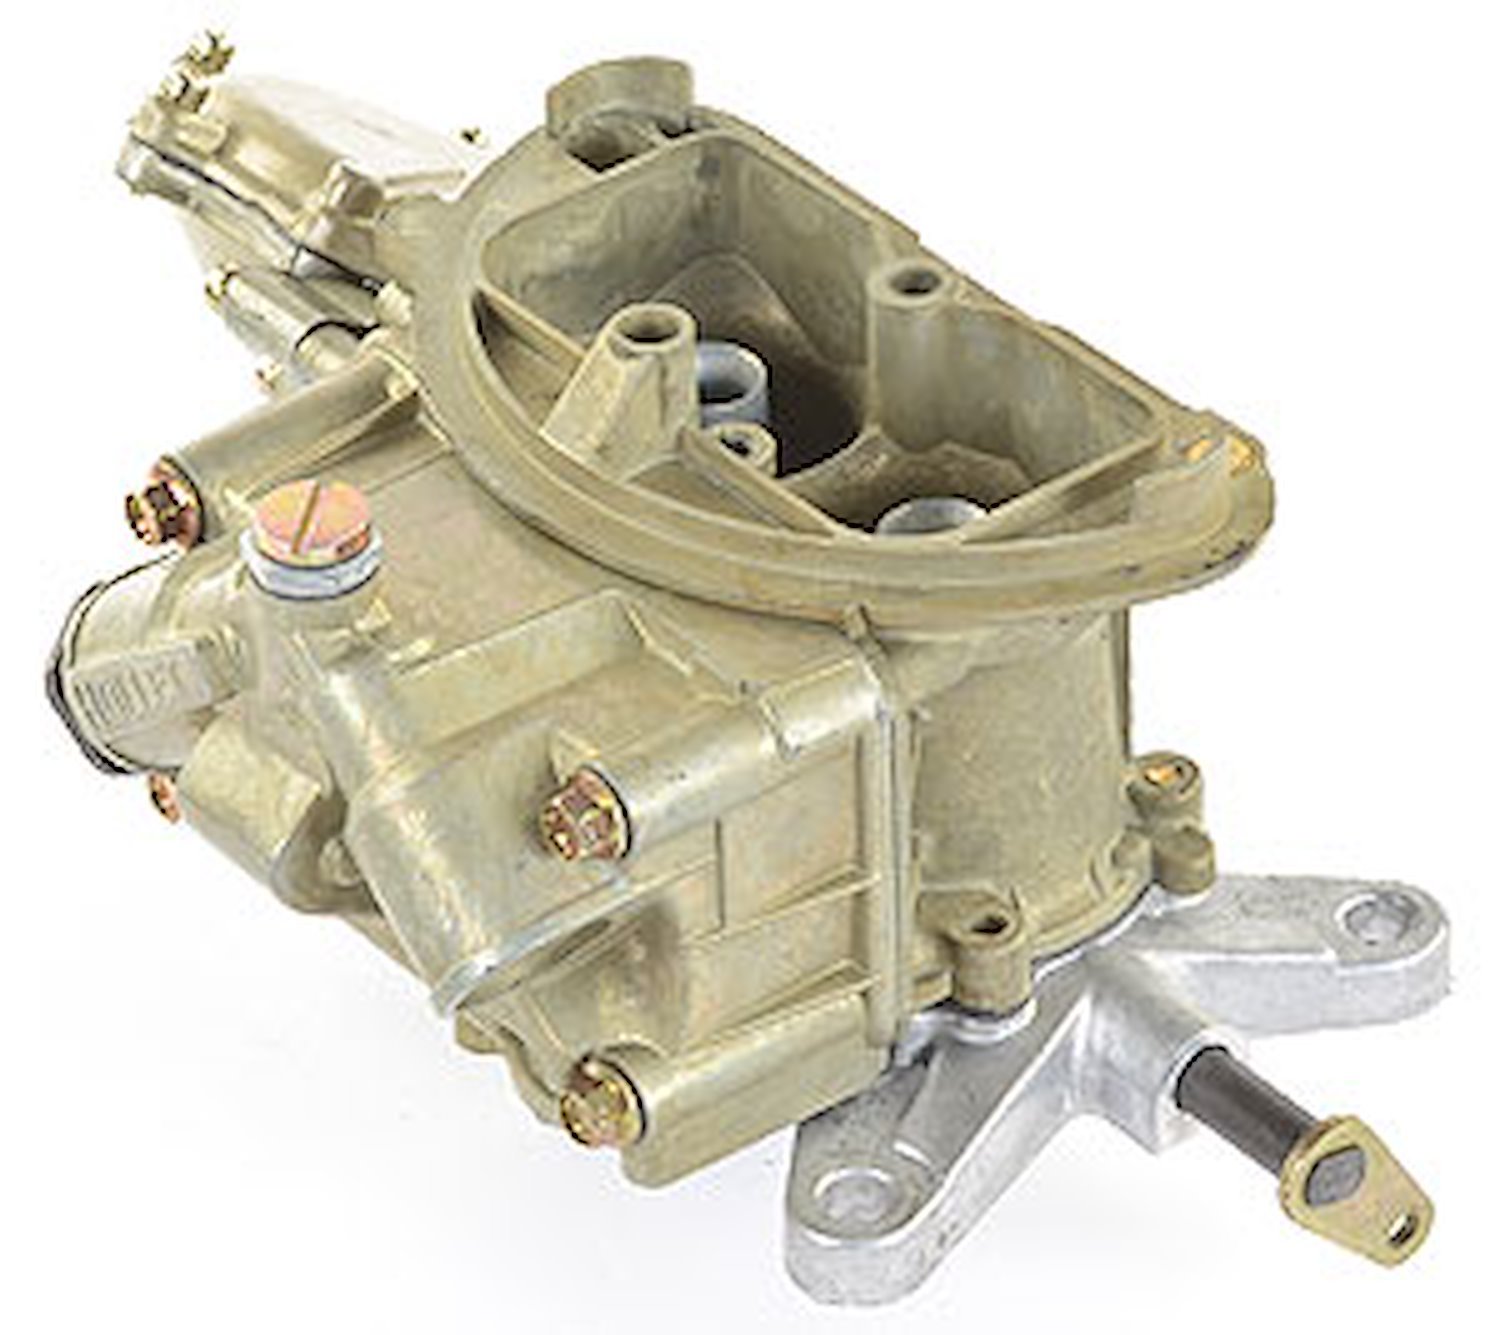 Chrysler OE Muscle Car Carb For 1969-70 440/390